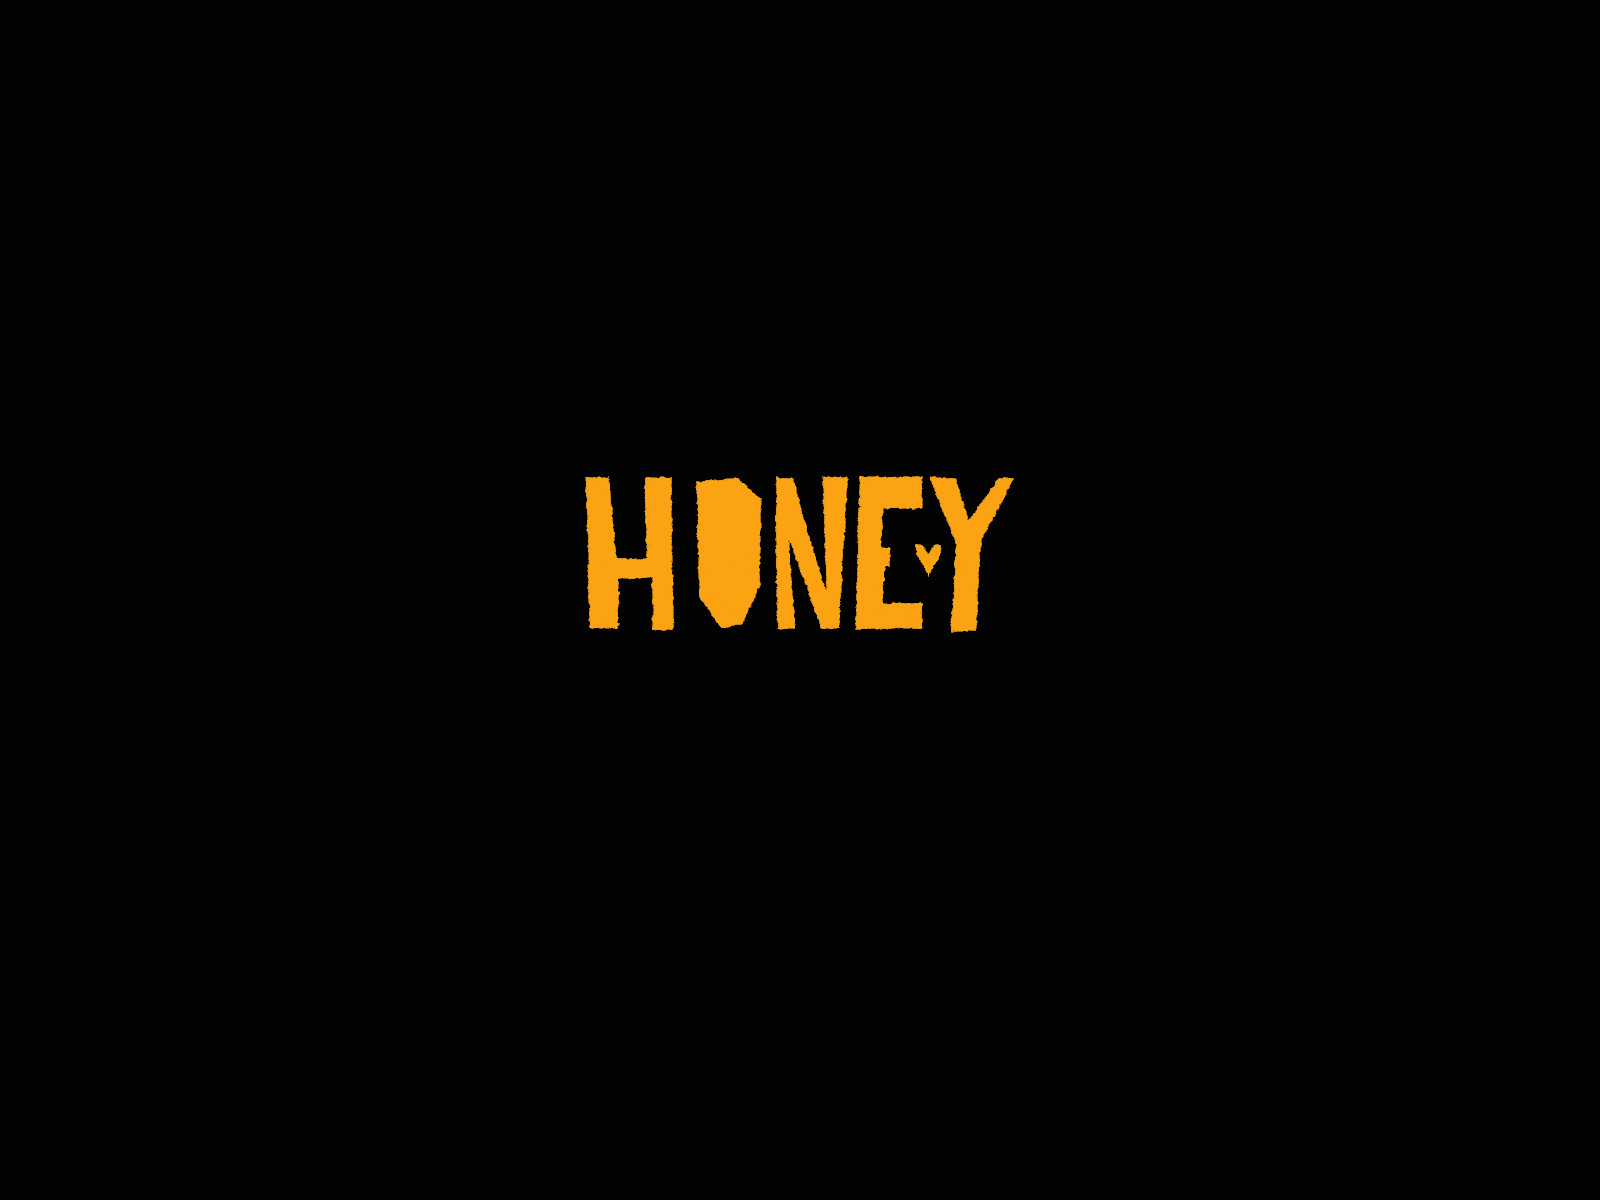 honey, I'm home 2d ae after effects animation at home frame by frame gif honey illustration man motion graphic rough animator vector